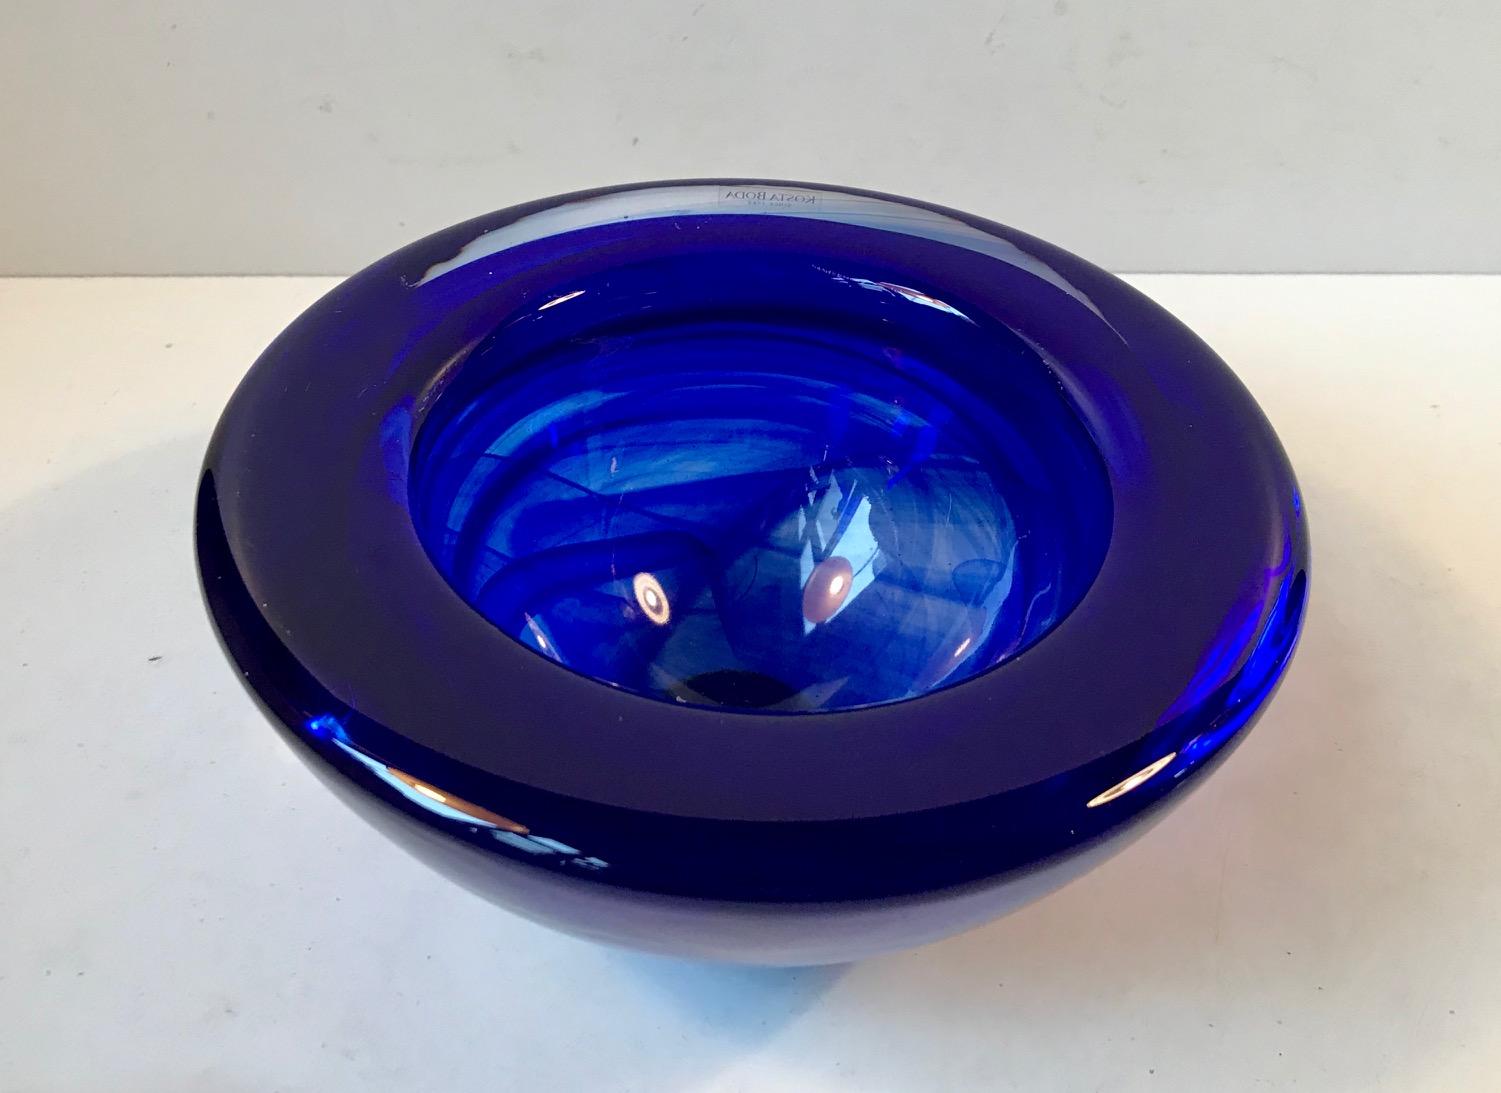 Thick and heavy conical art glass bowl from Kosta Boda in Sweden. It was designed by Anna Ehrner in the mid-1980s. The bowl is called Atoll and it features swirl-work to the inside. Original sticker from Kosta Boda still present to the side.